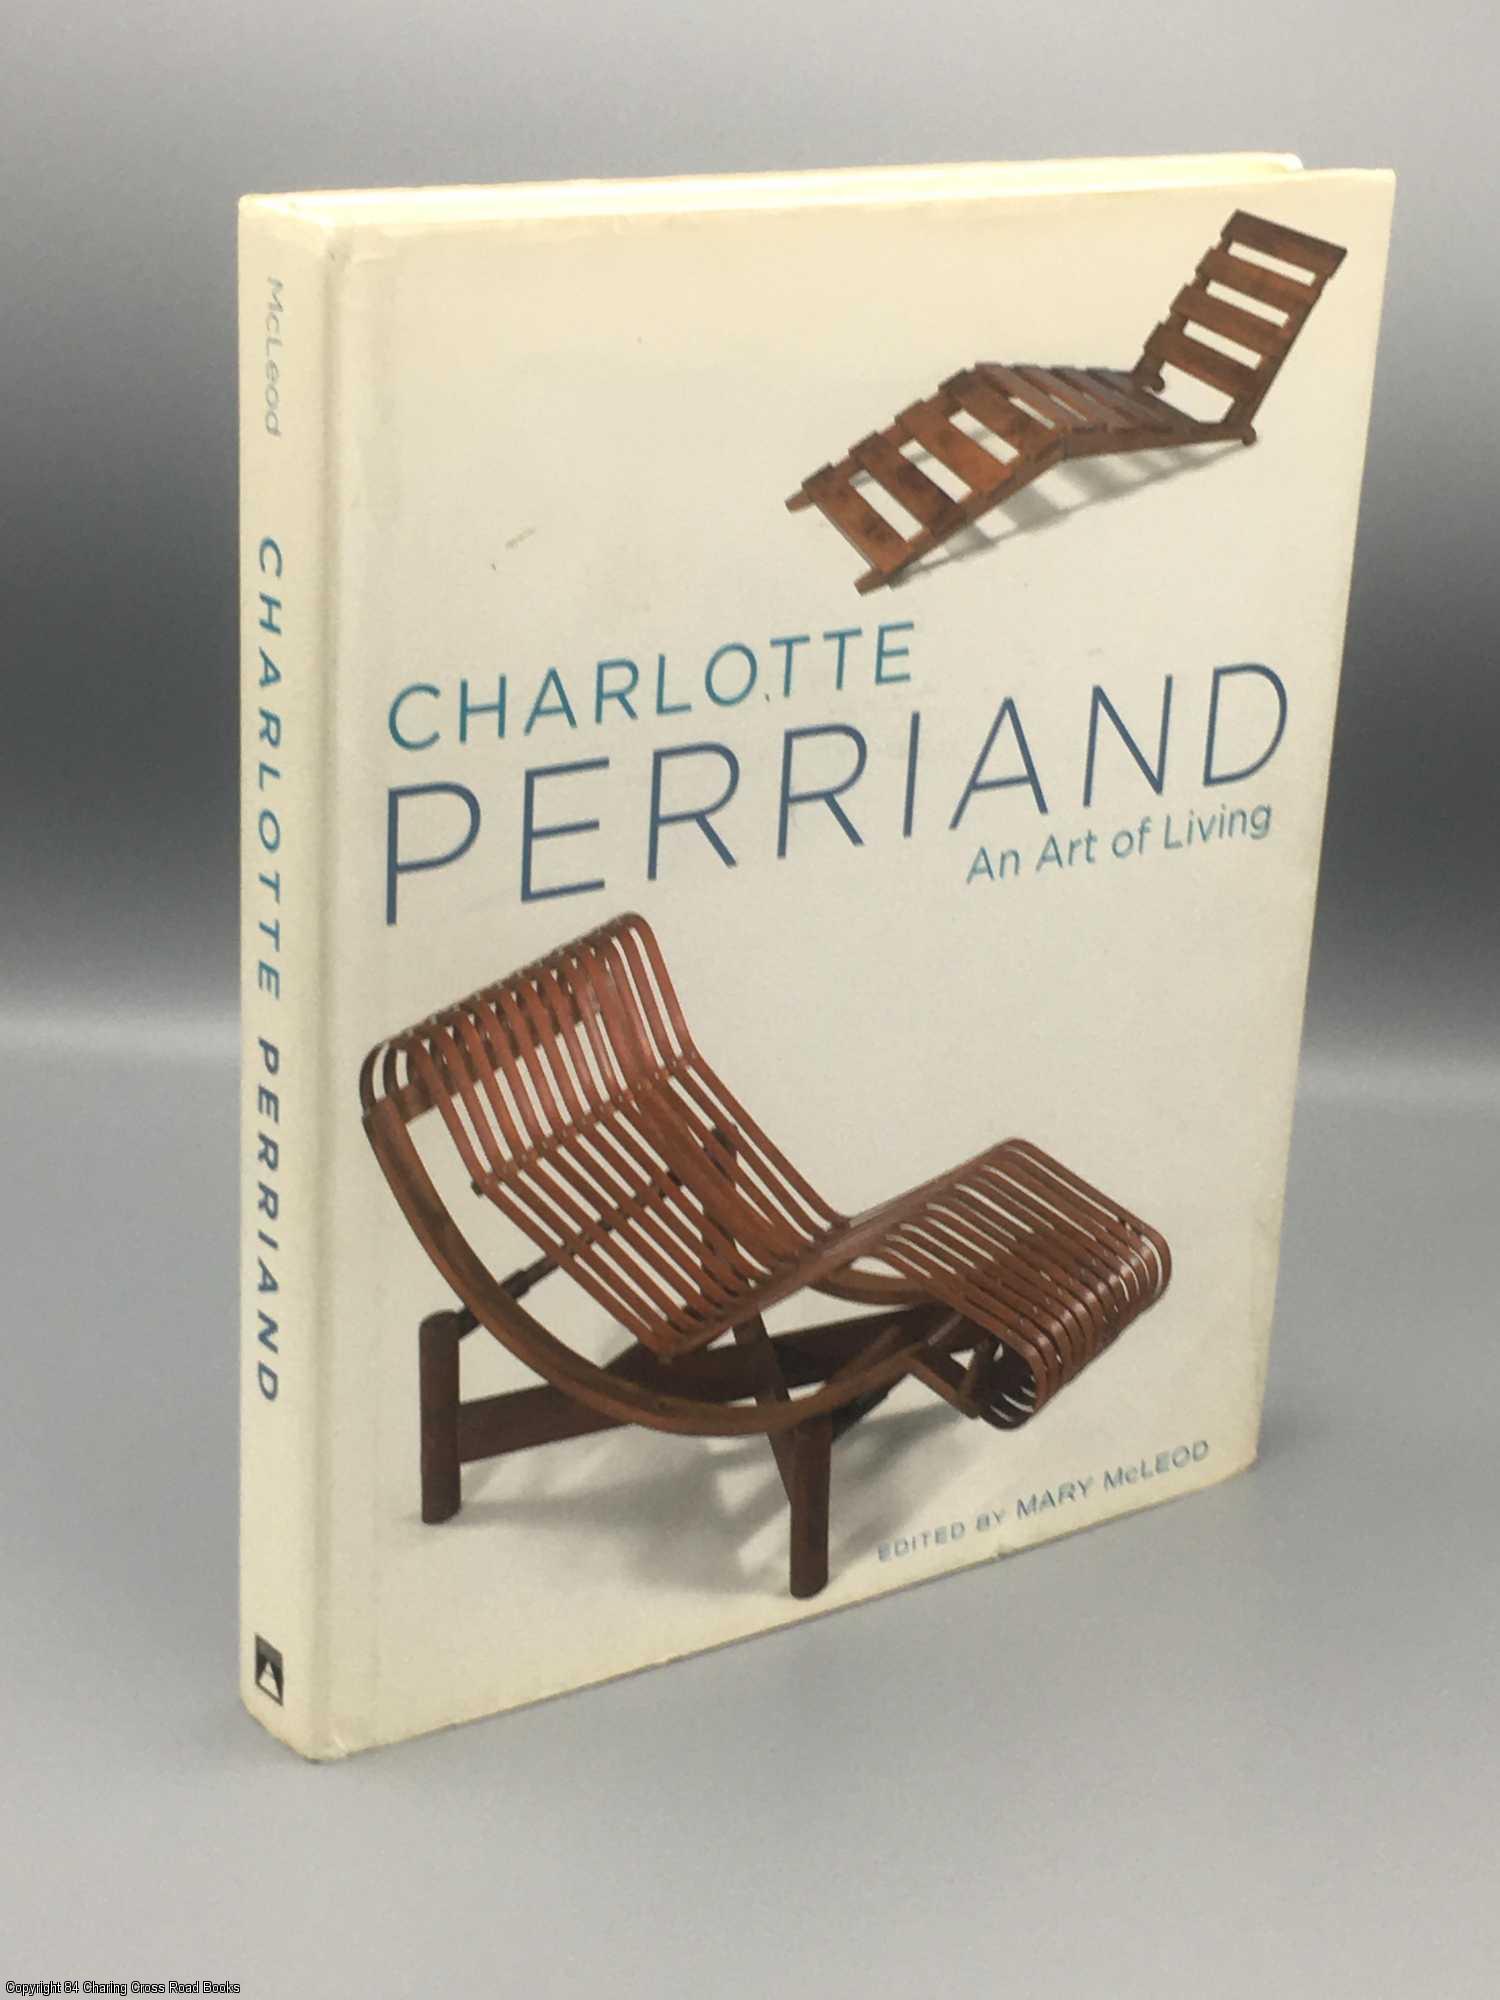 Charlotte Perriand, Obsessions